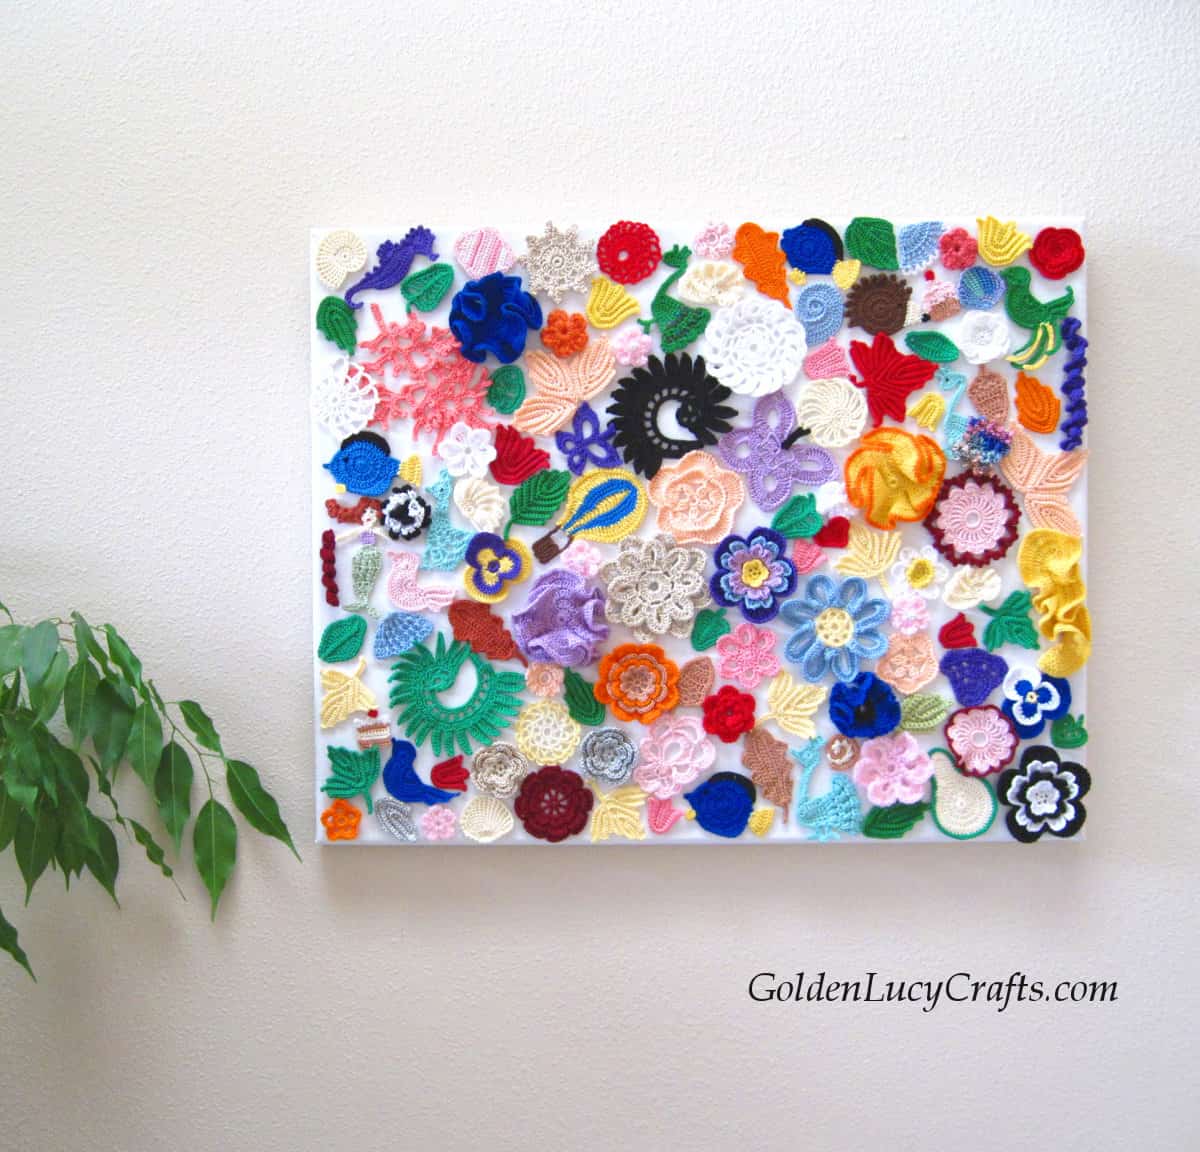 Crochet wall art made from different crocheted  applique samples.